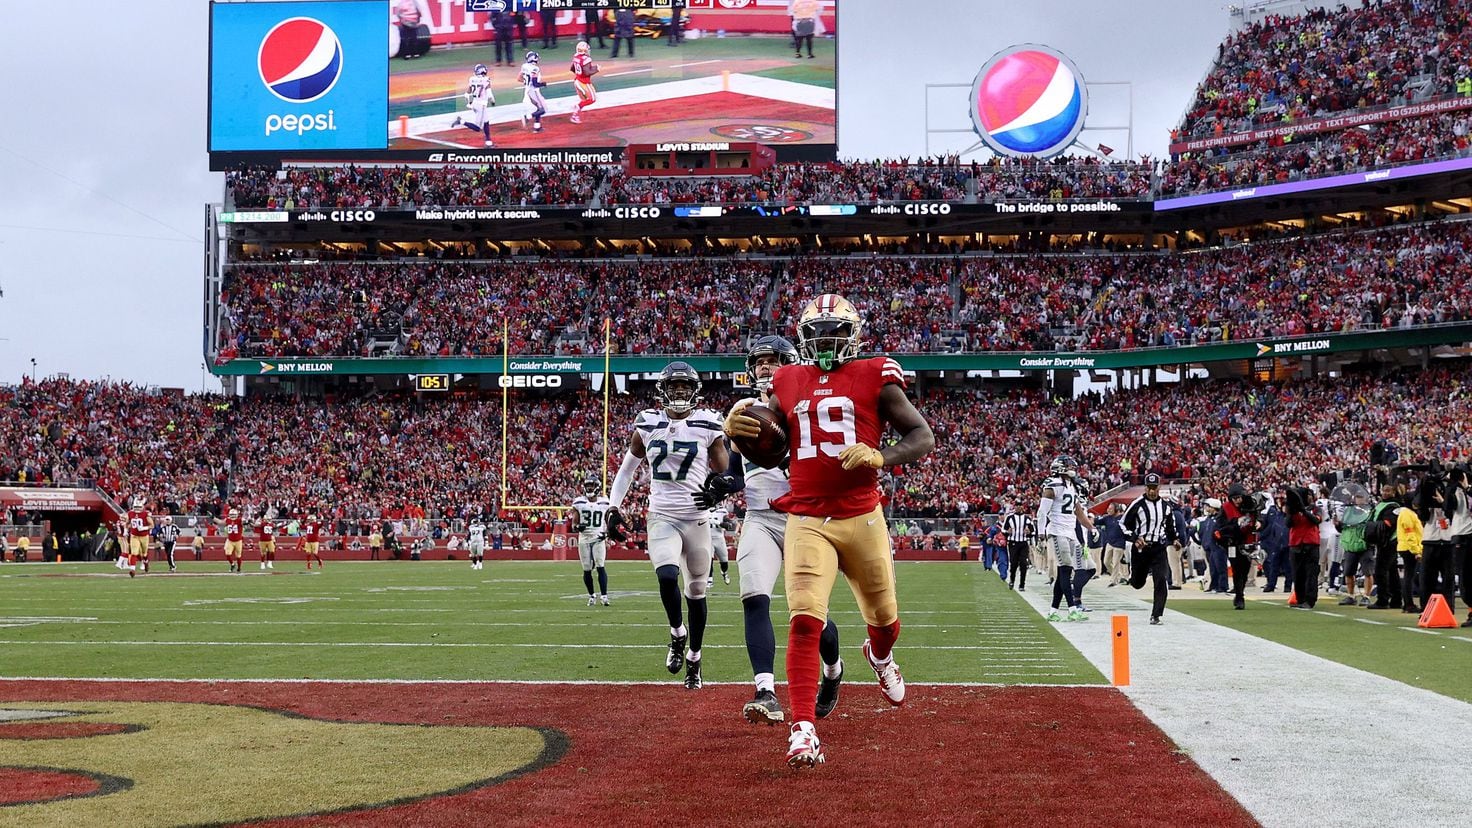 San Francisco 49ers playoff tickets skyrocket for game against Cowboys